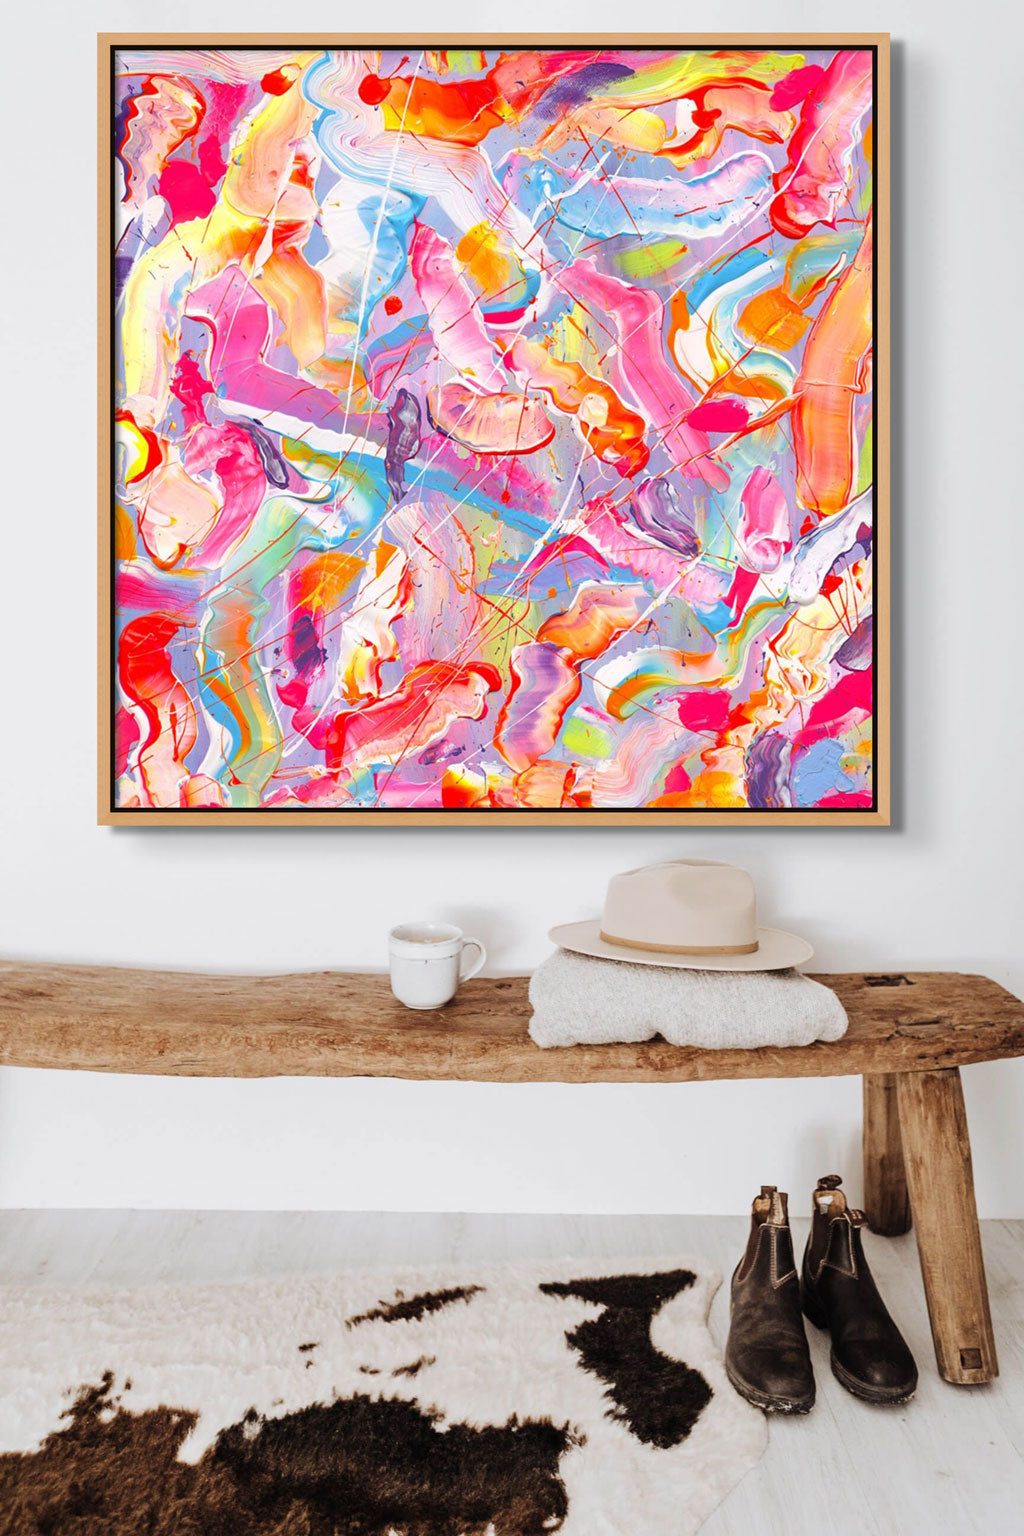 'Sugar Fix' colourful abstract art print on canvas in oak float frame seen ganging above a wooden bench. After the original art by Bridget Bradley